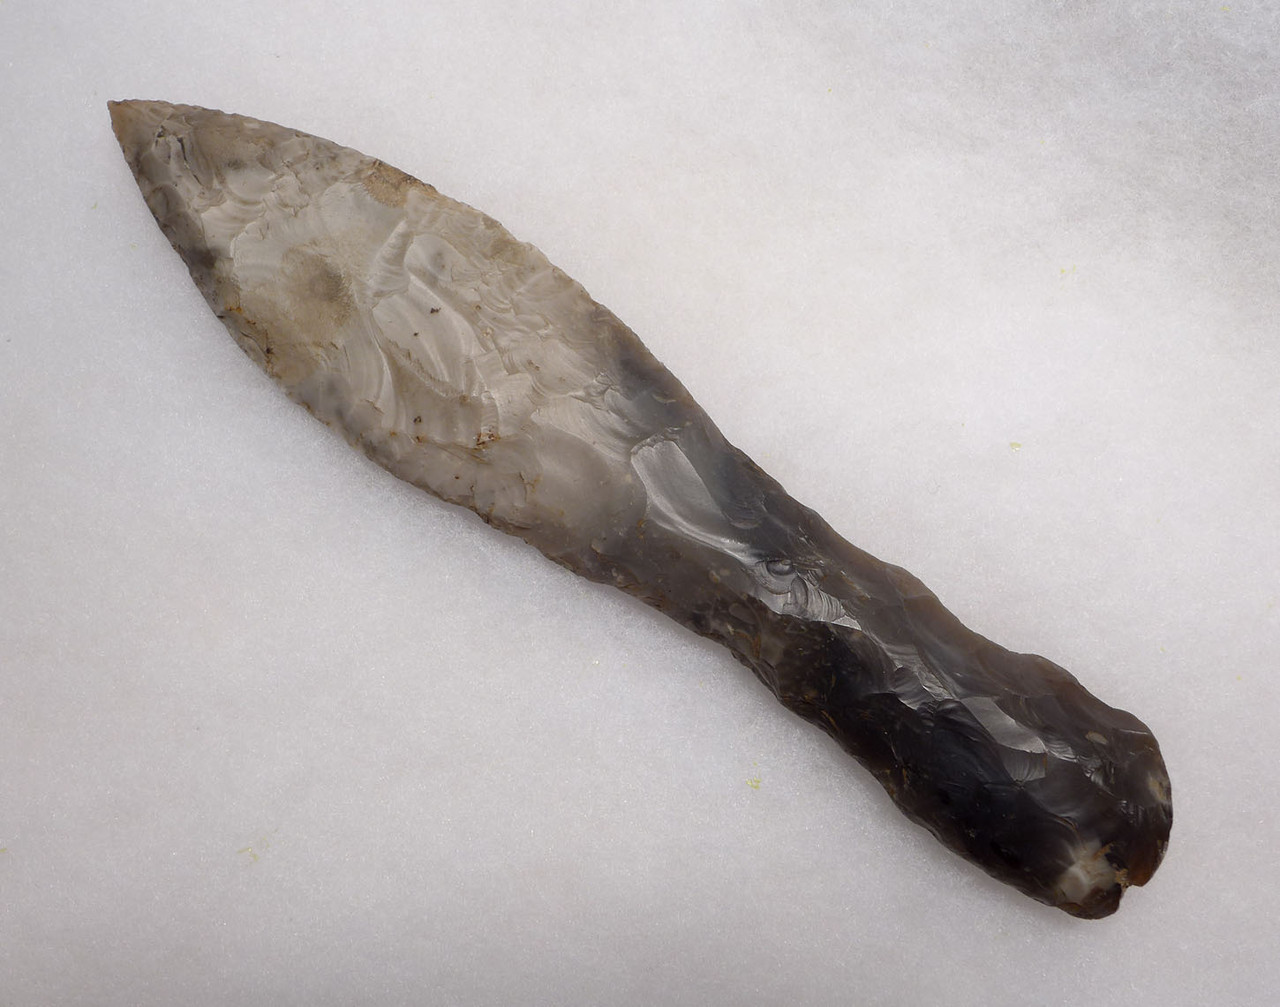 INVESTMENT-CLASS LATE NEOLITHIC TYPE II PRESTIGE FLAKED FLINT DAGGER OF THE EUROPEAN CORDED WARE CULTURE  *N281